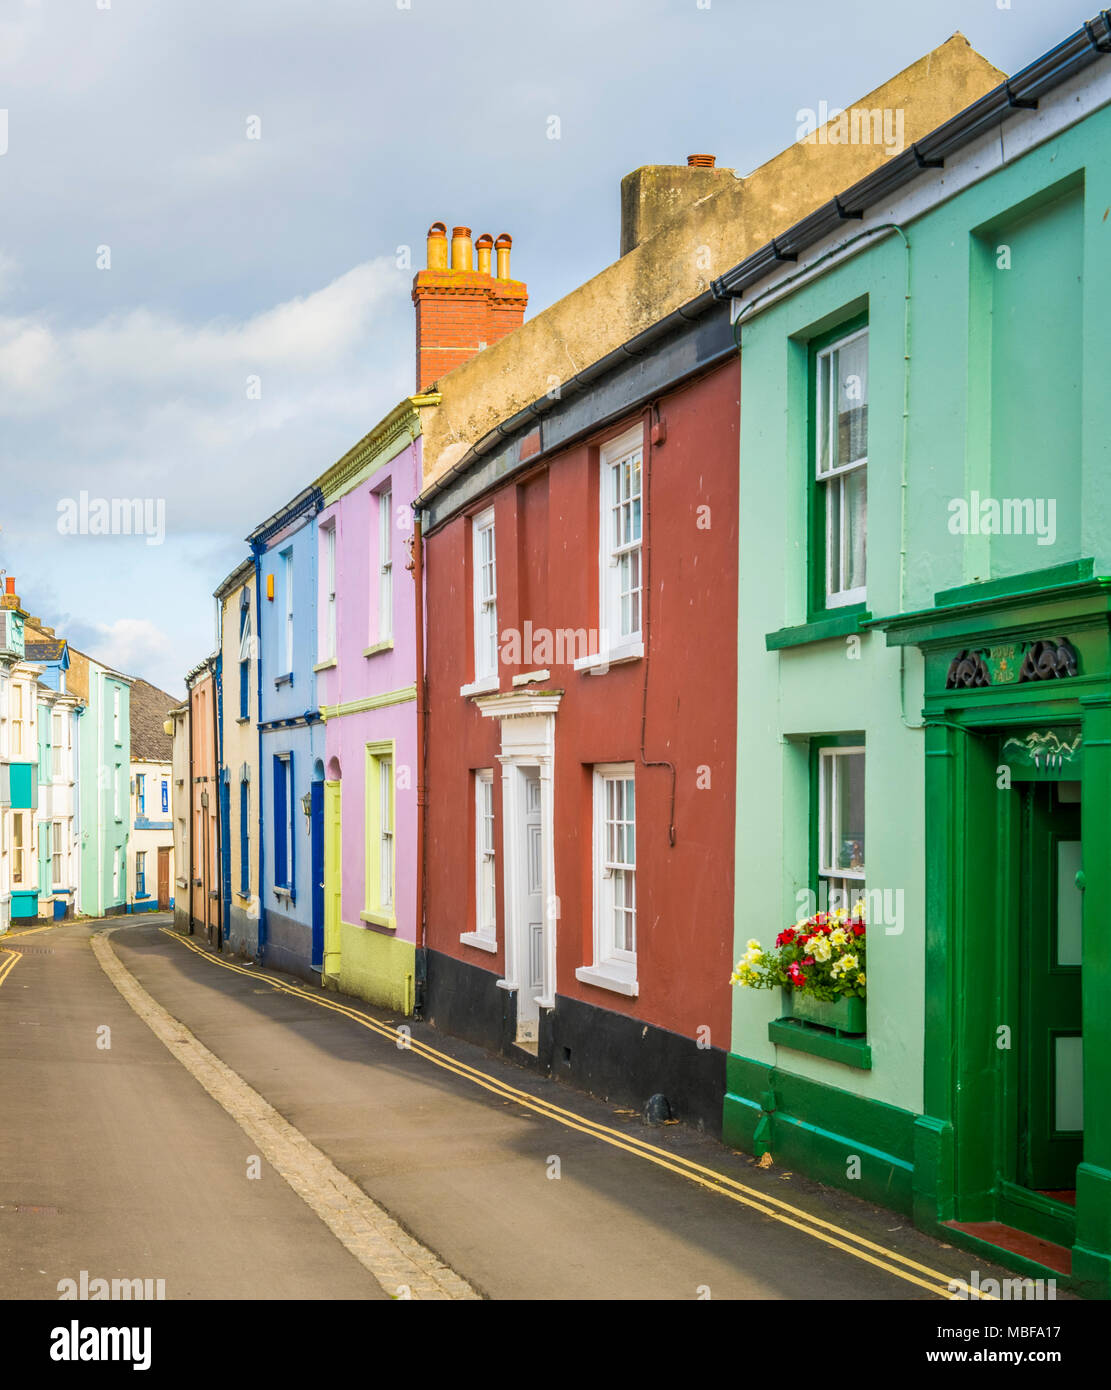 Colourful terraced houses in a narrow street in Appledore, Devon, England UK Stock Photo